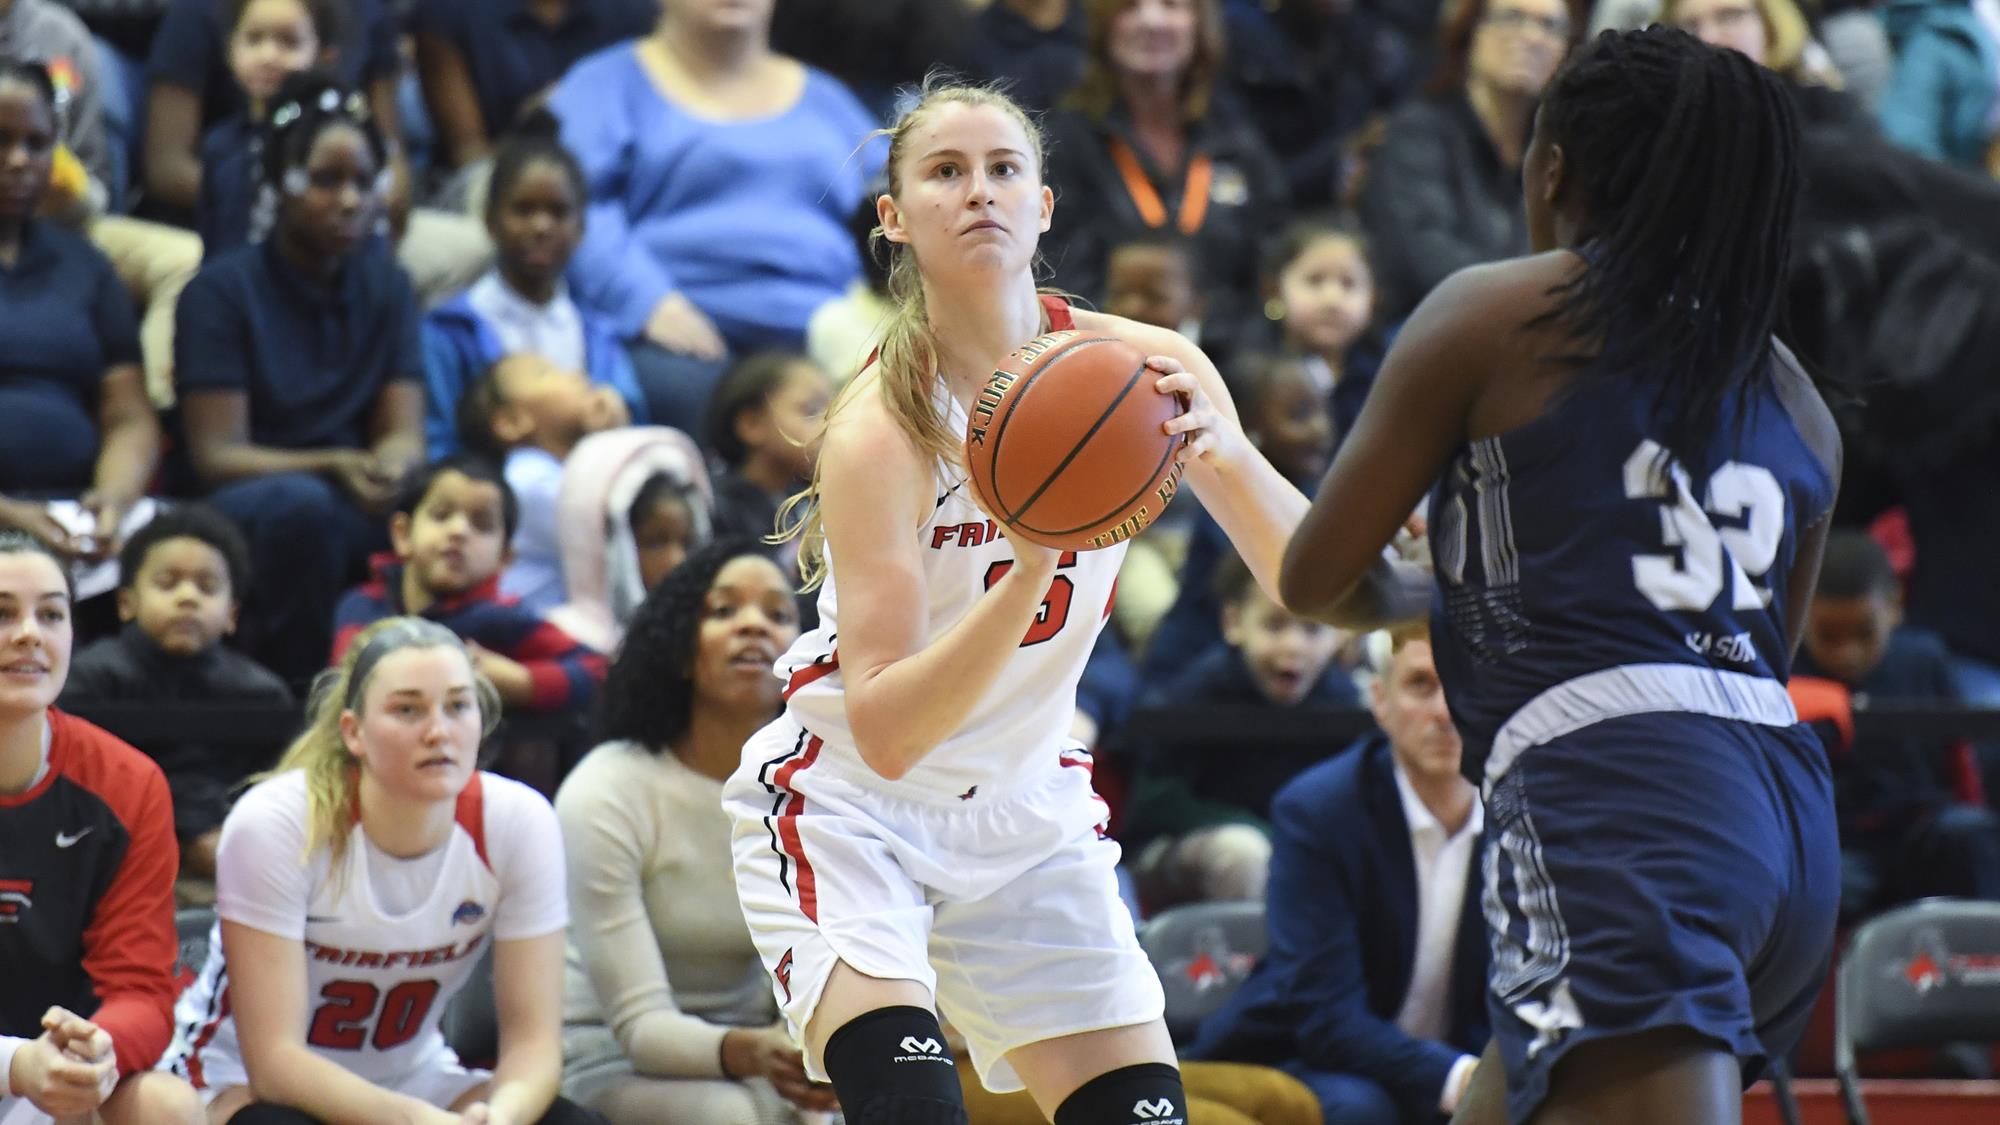 Katie Armstrong attempts to take a jumpshot during a Fairfield women's basketball game.